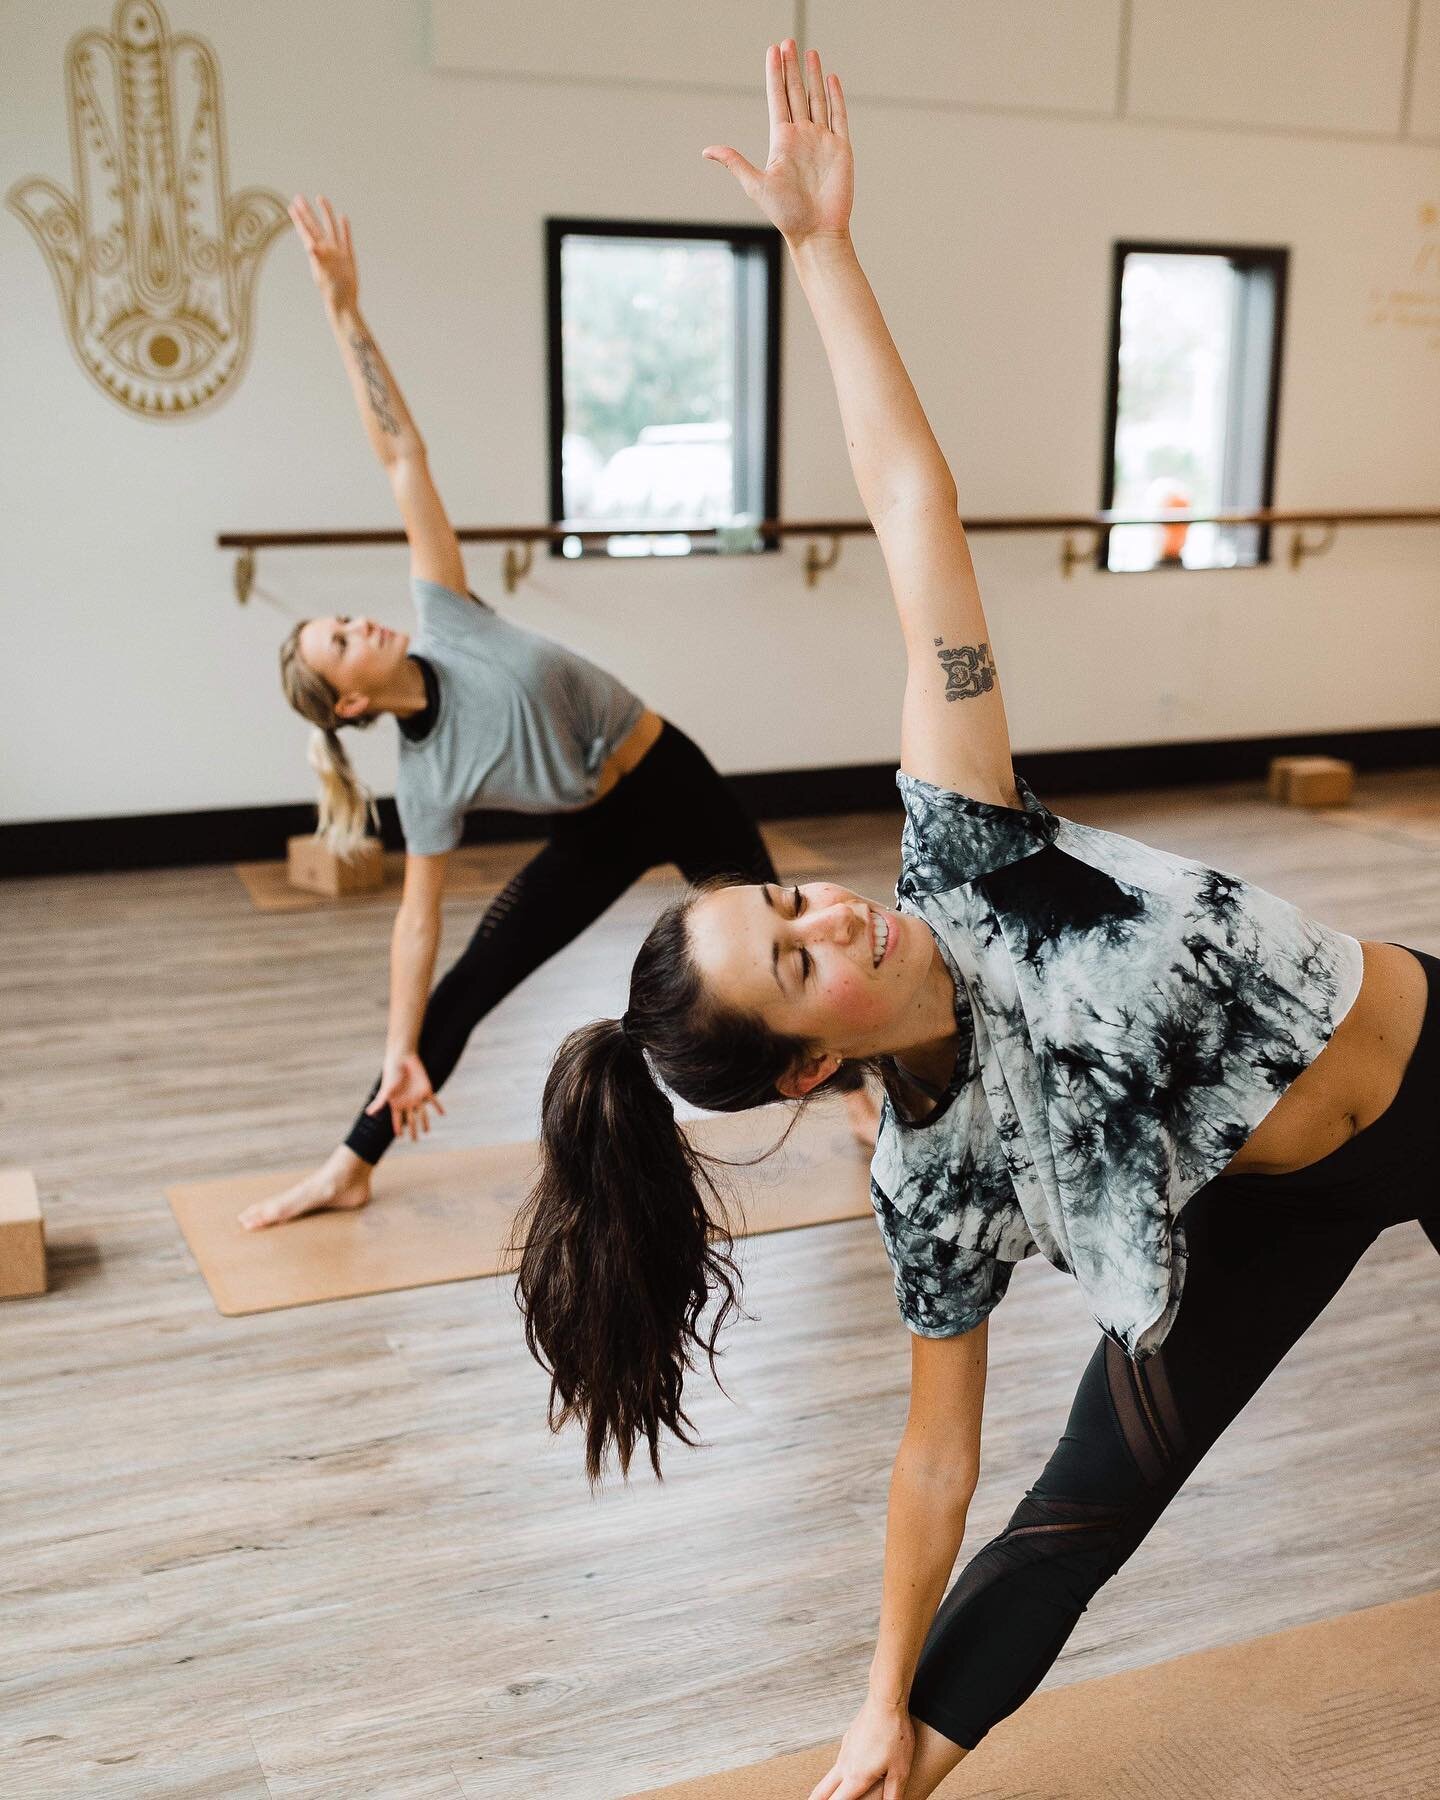 Did you know that all of our staff at Alchemy Massage are also movement educators? 

Weekly classes are offered at @thealchemyflow by Steph, Sheri &amp; Shendra, while one on one Reformer Pilates is offered by Jamie. 

Here&rsquo;s how to participate